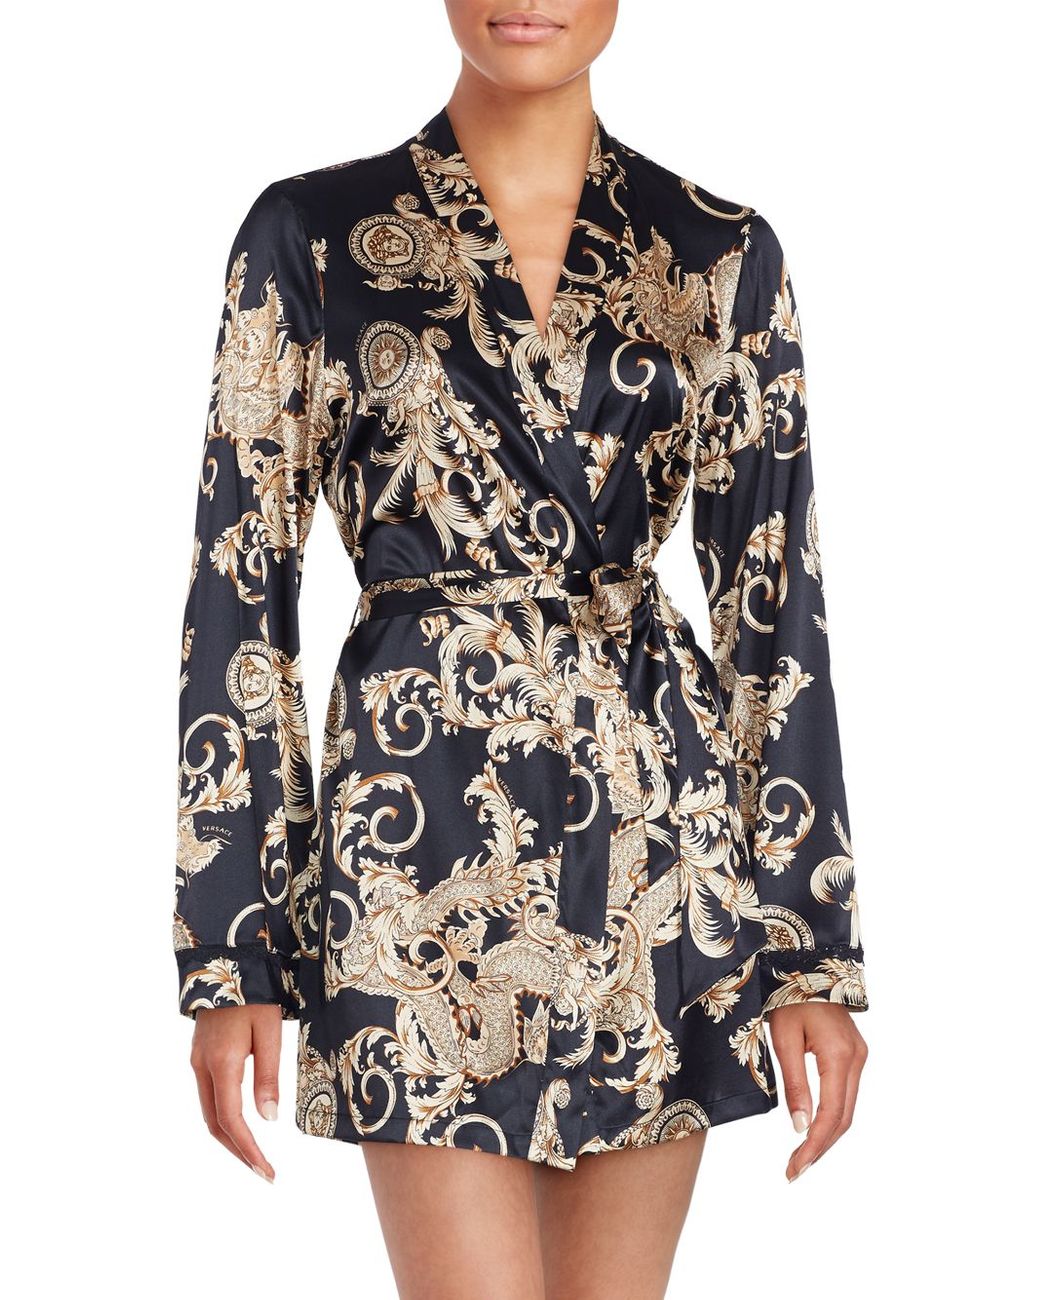 Versace Dressing Gowns & Robes for Women - Shop on FARFETCH